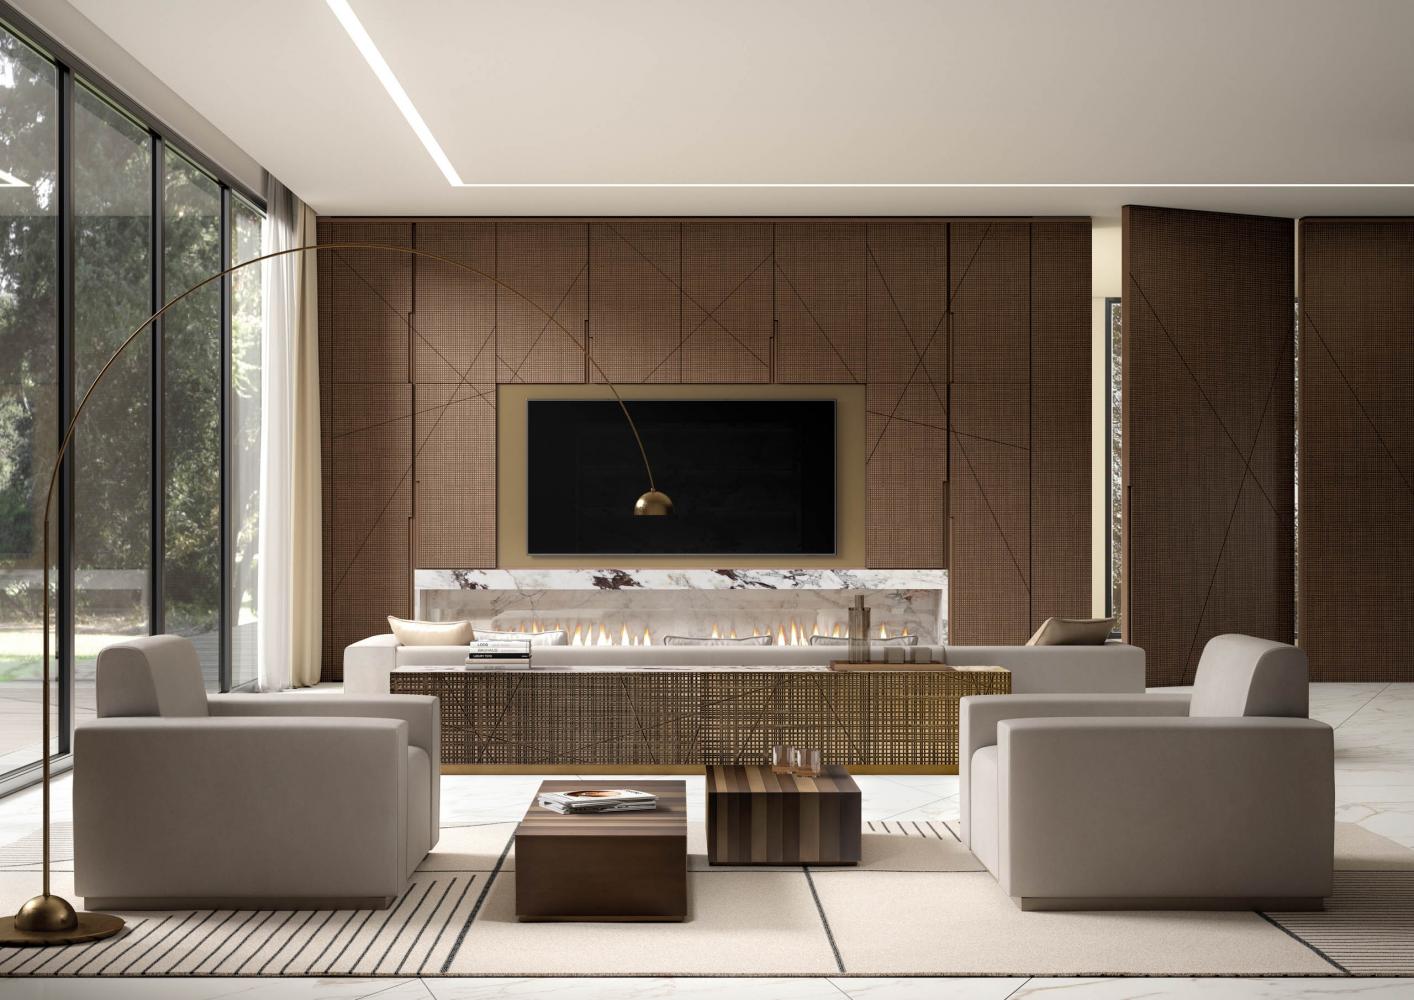 Laurameroni Maxima Cabinet System made to measure artisanal, luxury day wardrobes in carved wood